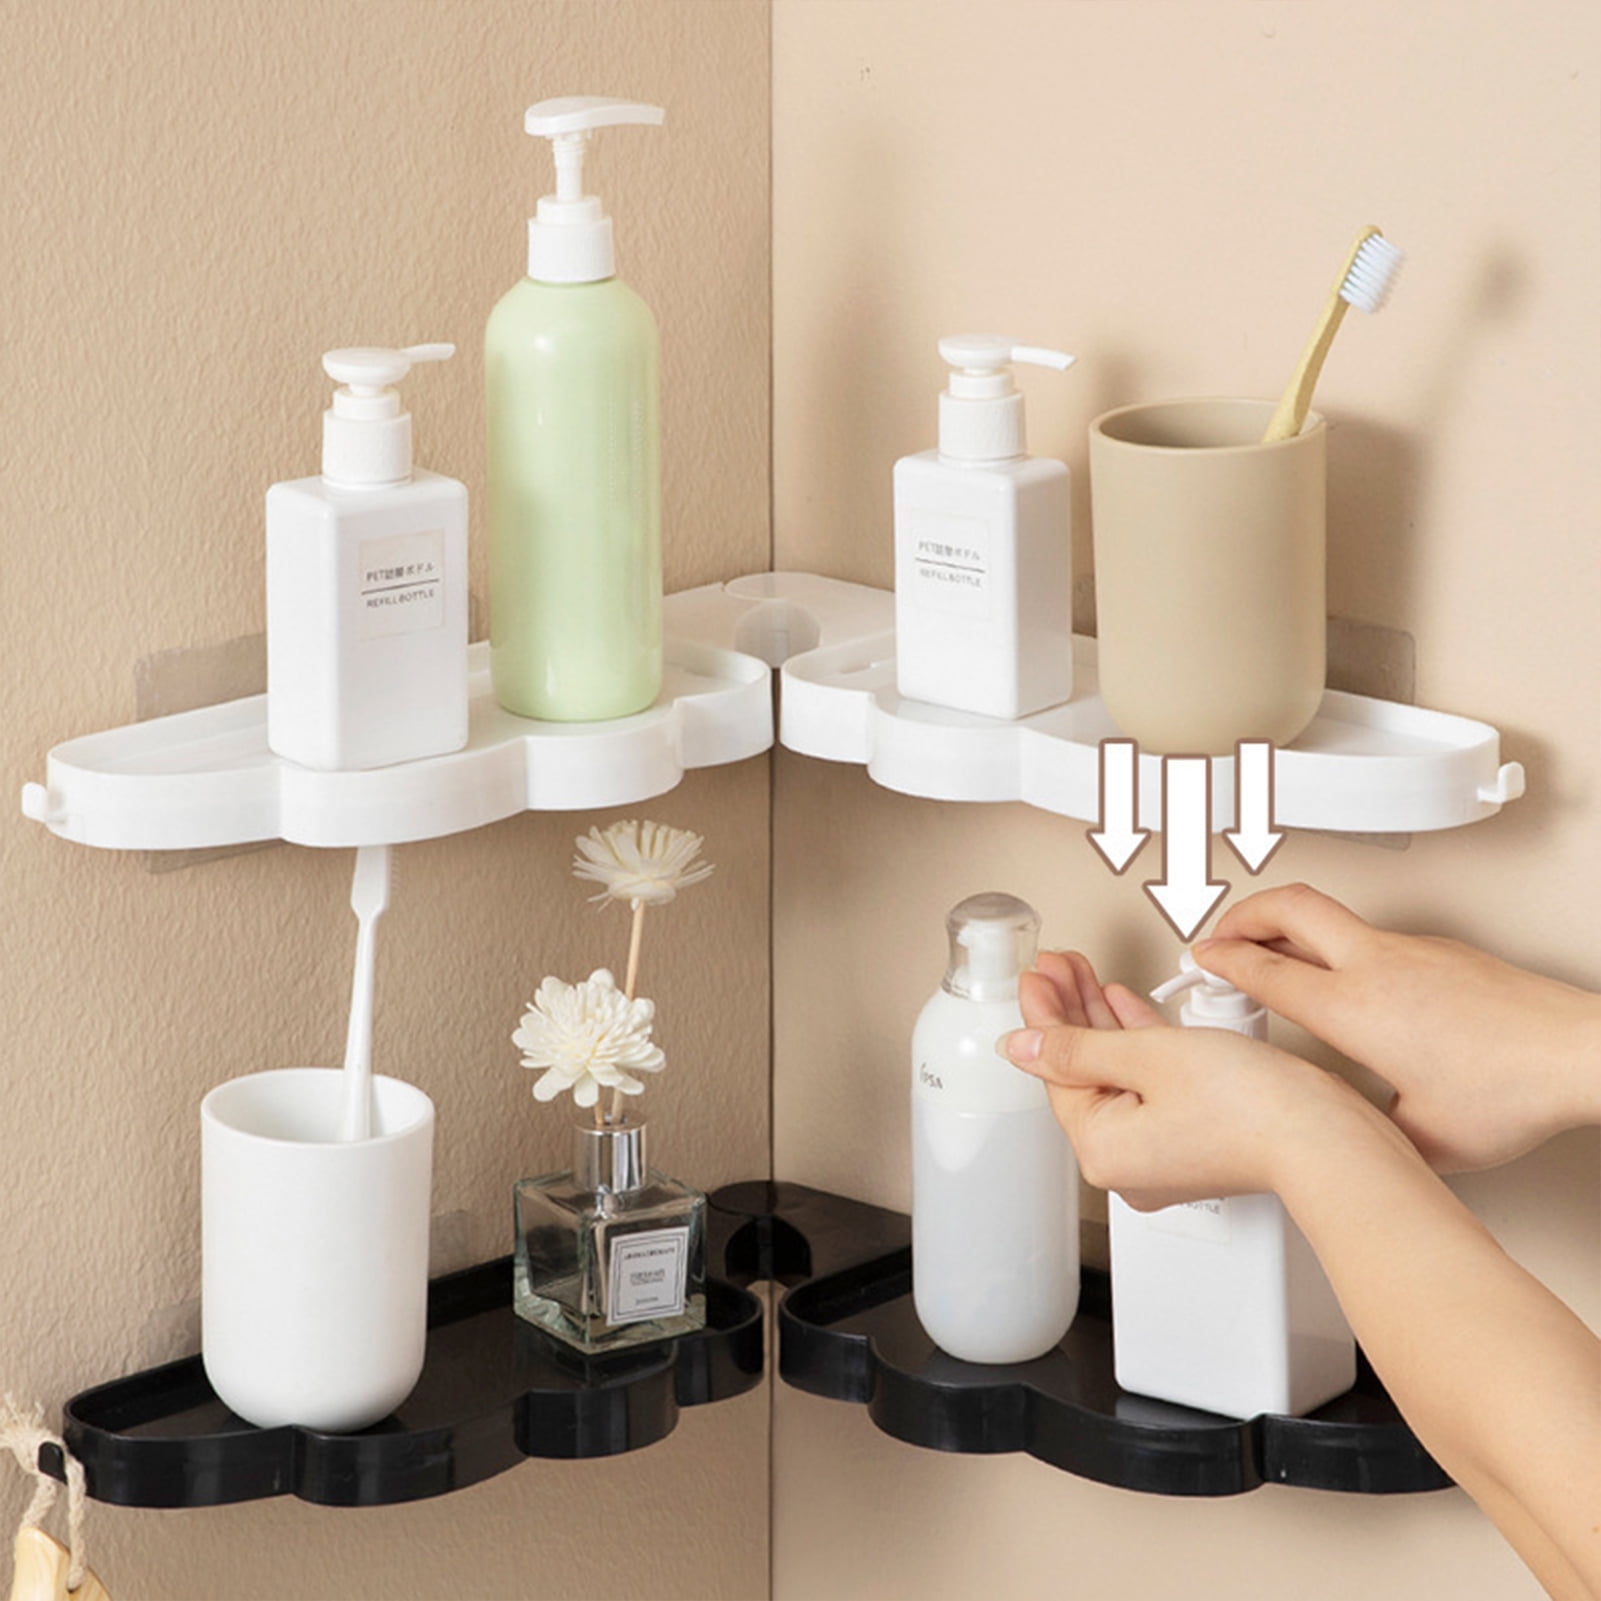 Search for Adhesive Corner Shelf For Shower